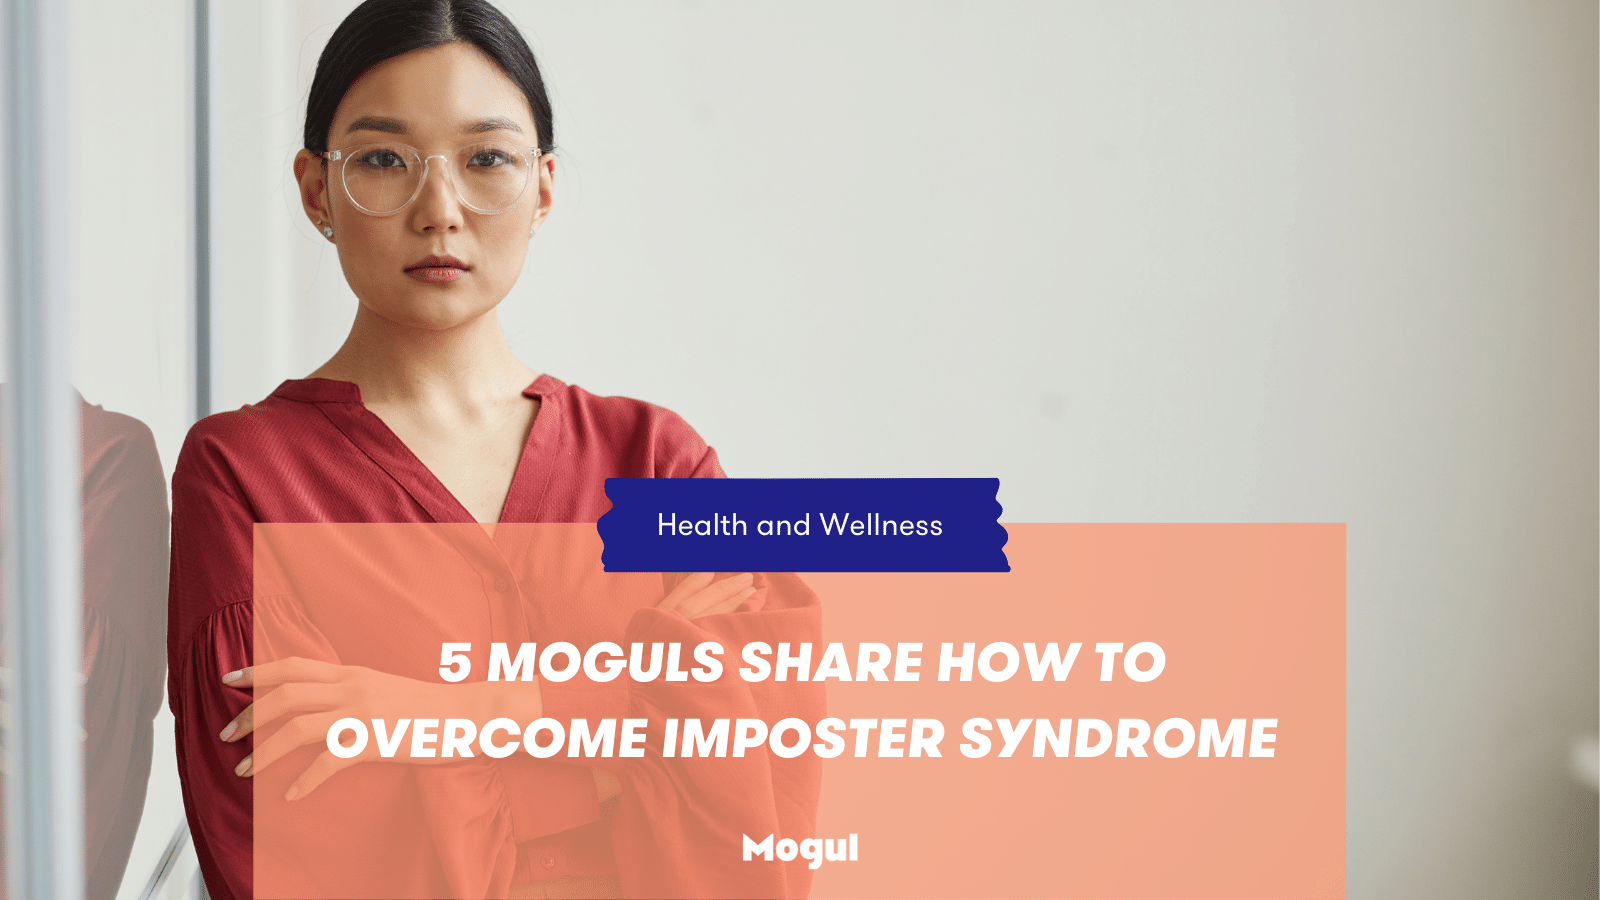 5 Moguls Share How to Overcome Imposter Syndrome